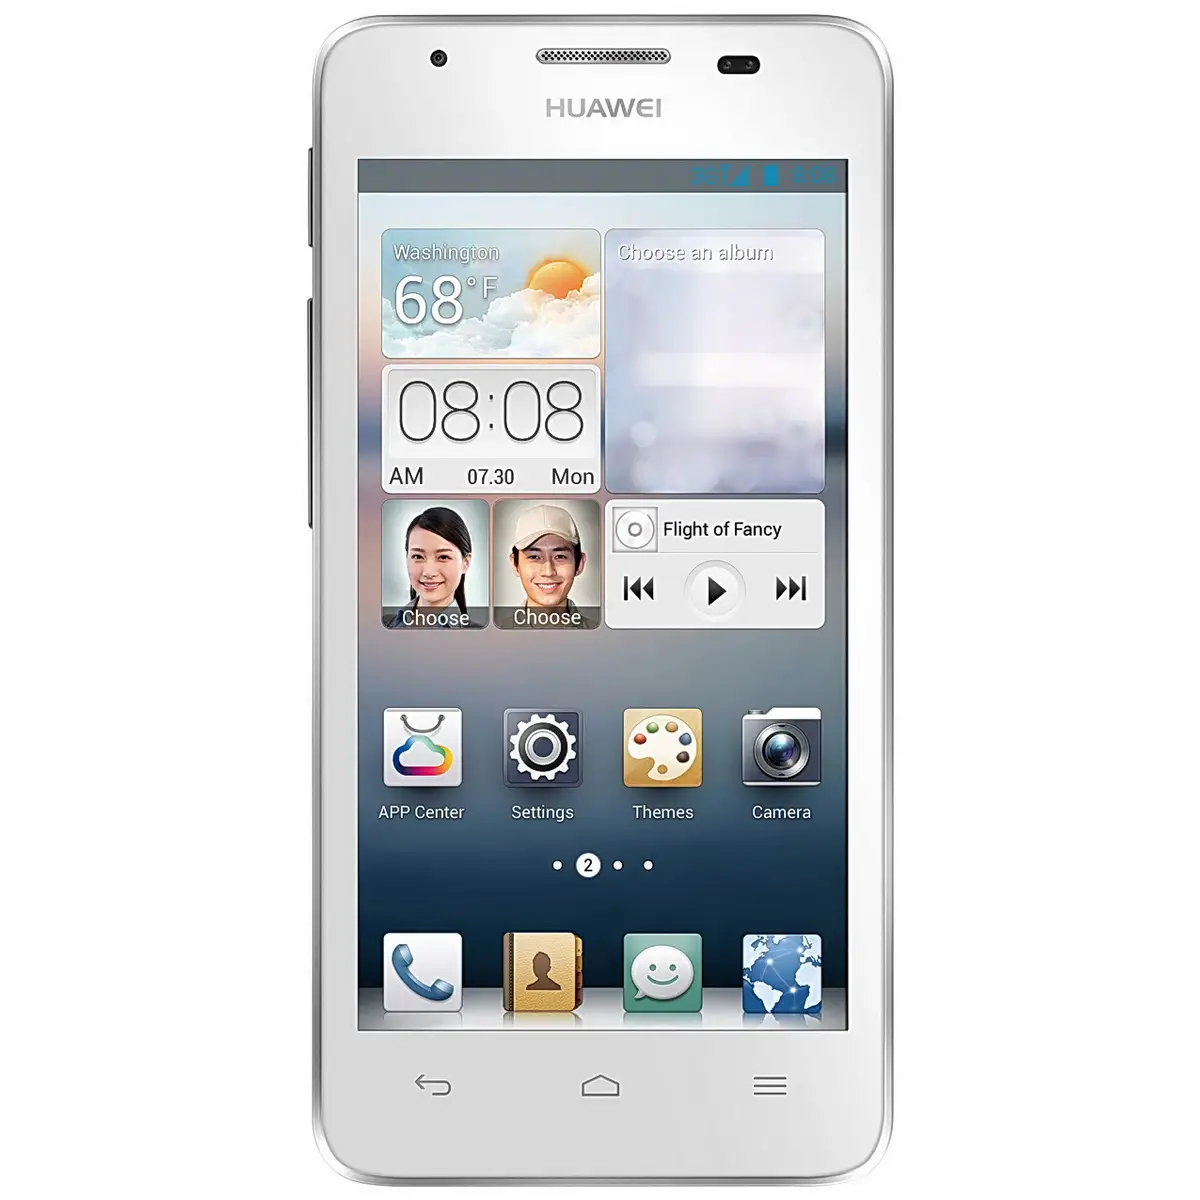 Flash Stock Firmware on Huawei Ascend G510-0200